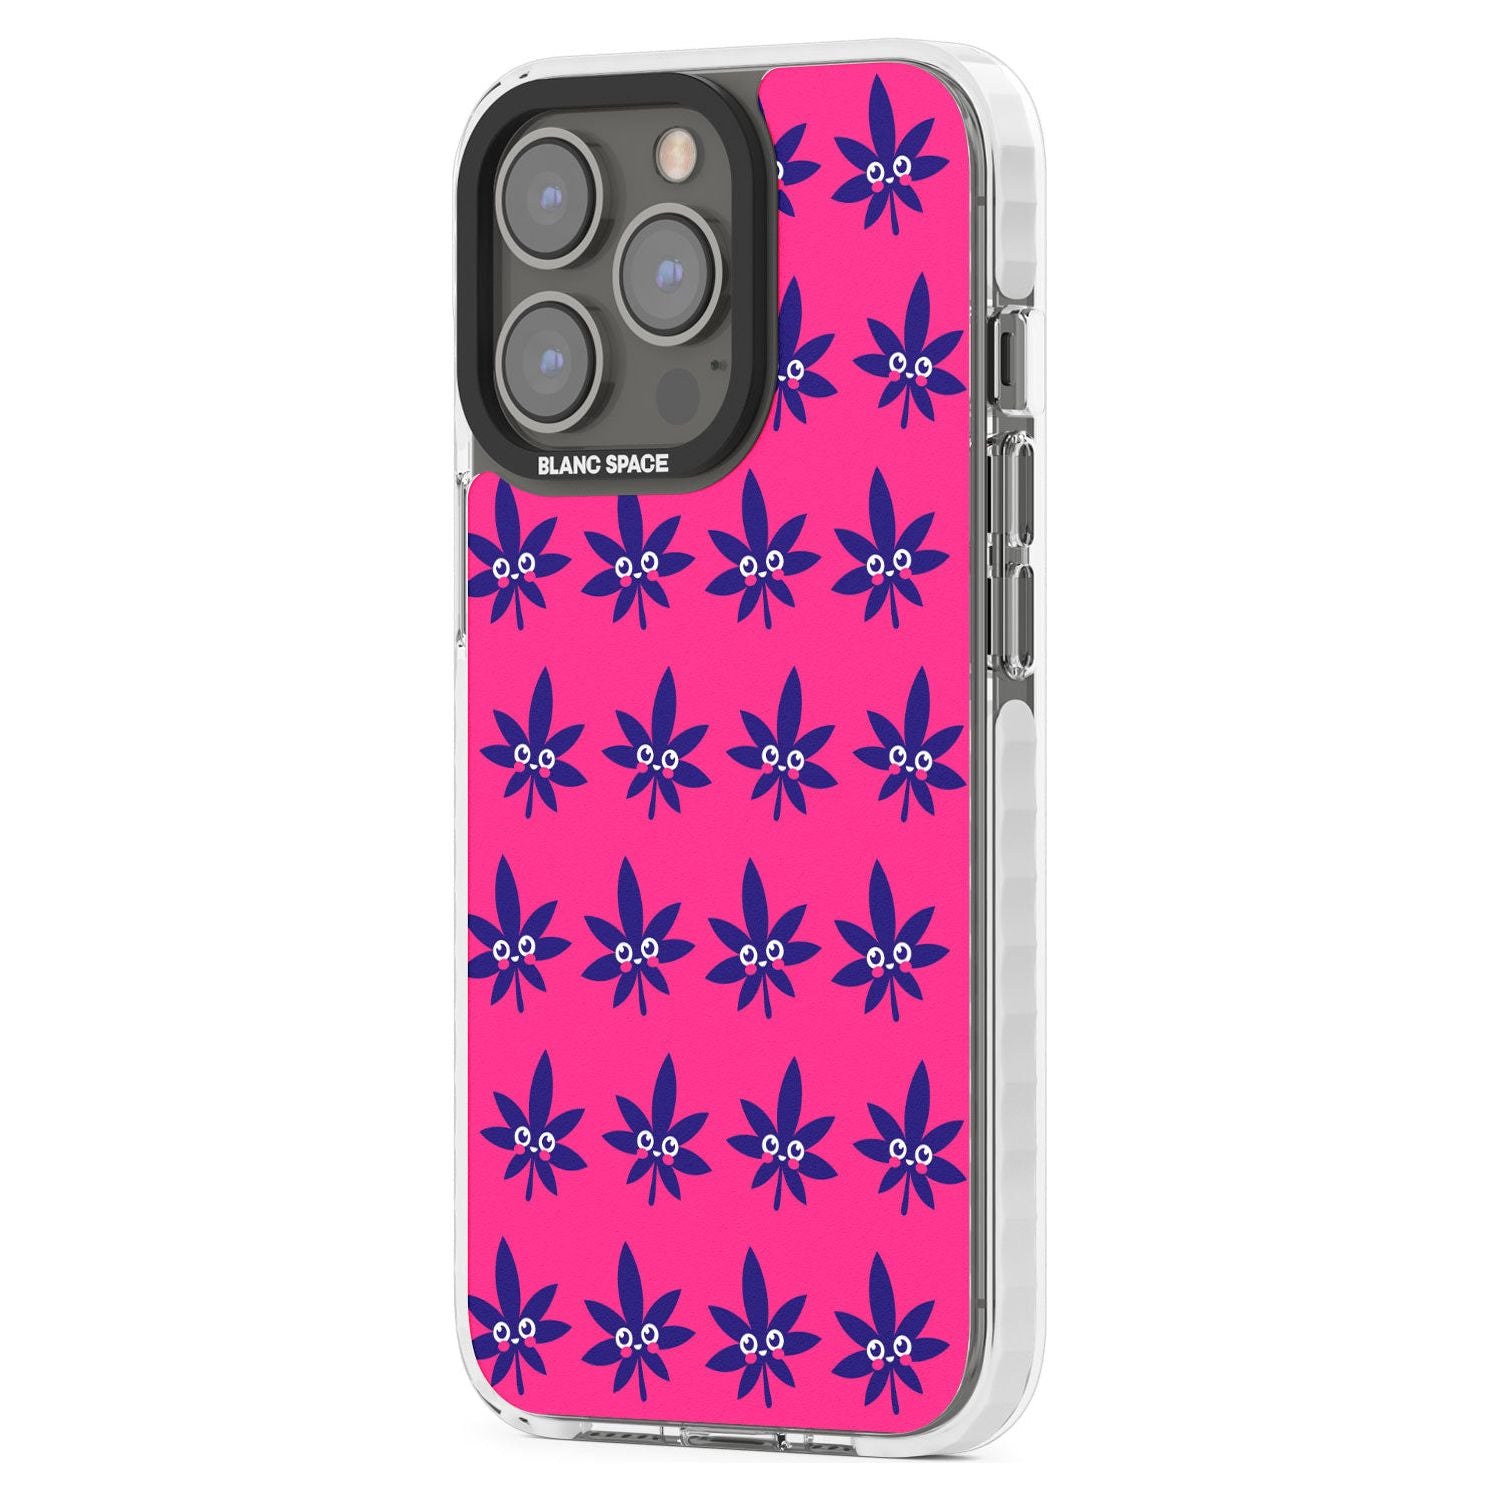 Martians & MunchiesPhone Case for iPhone 14 Pro